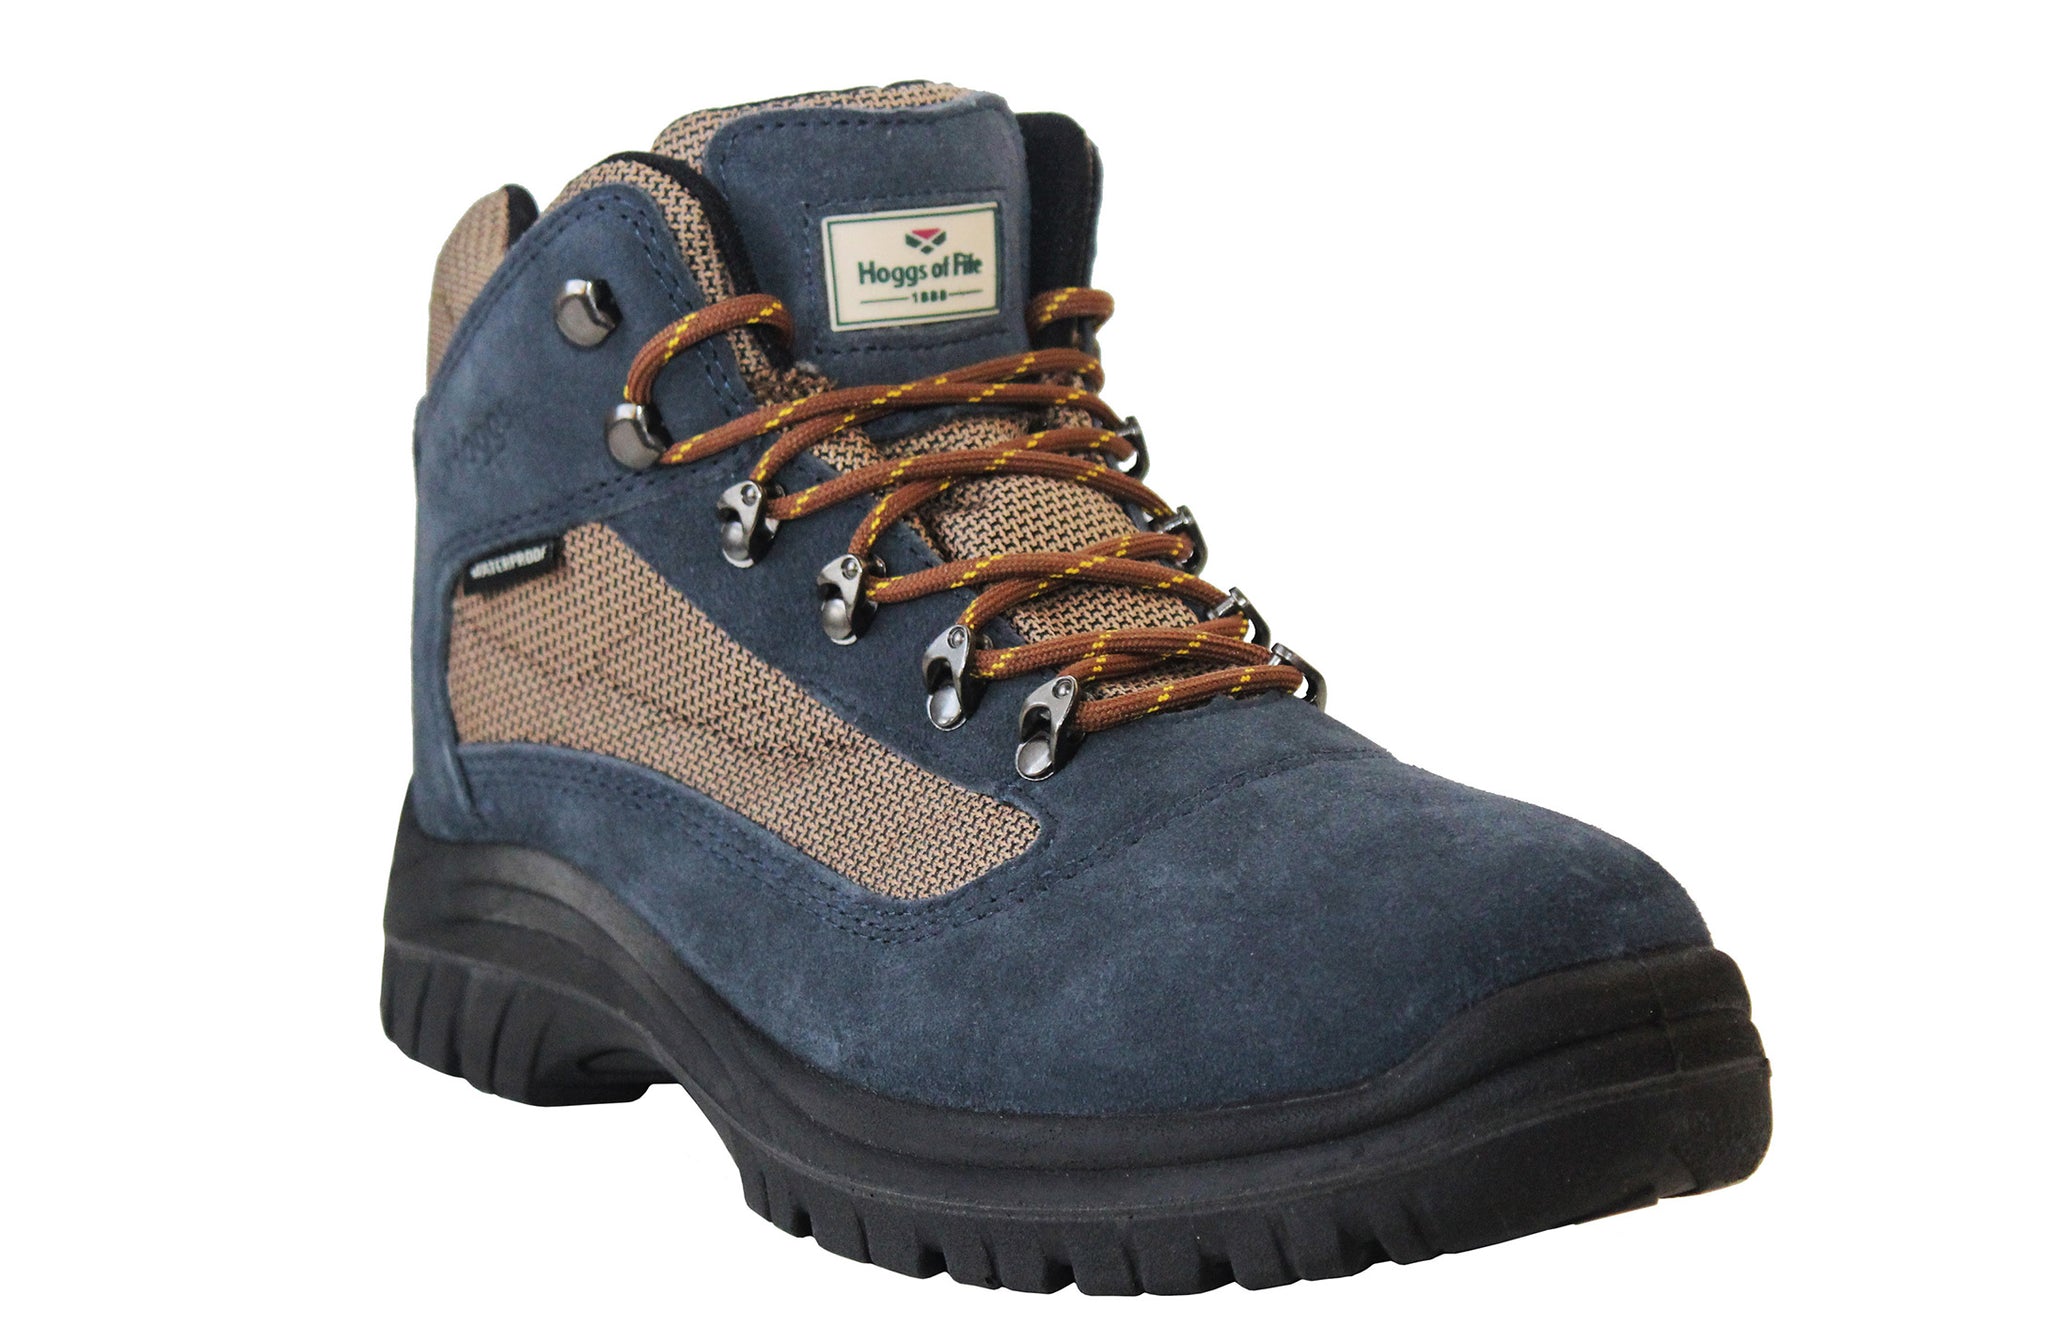 Hoggs of Fife Mens Navy Suede Waterproof Lace Up Hiking Trekking Boots